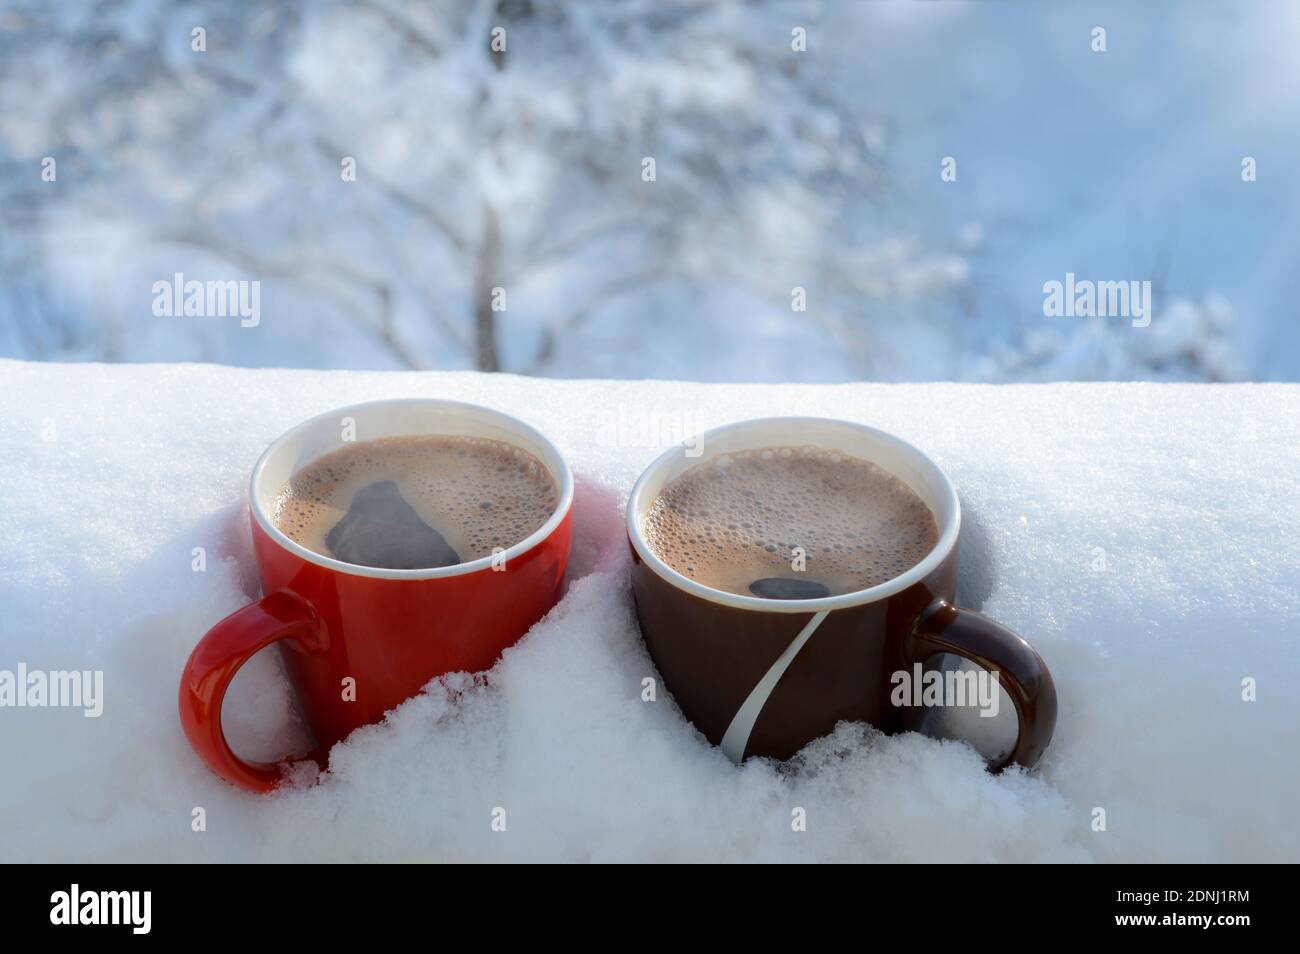 Download Page 3 Two Mugs High Resolution Stock Photography And Images Alamy